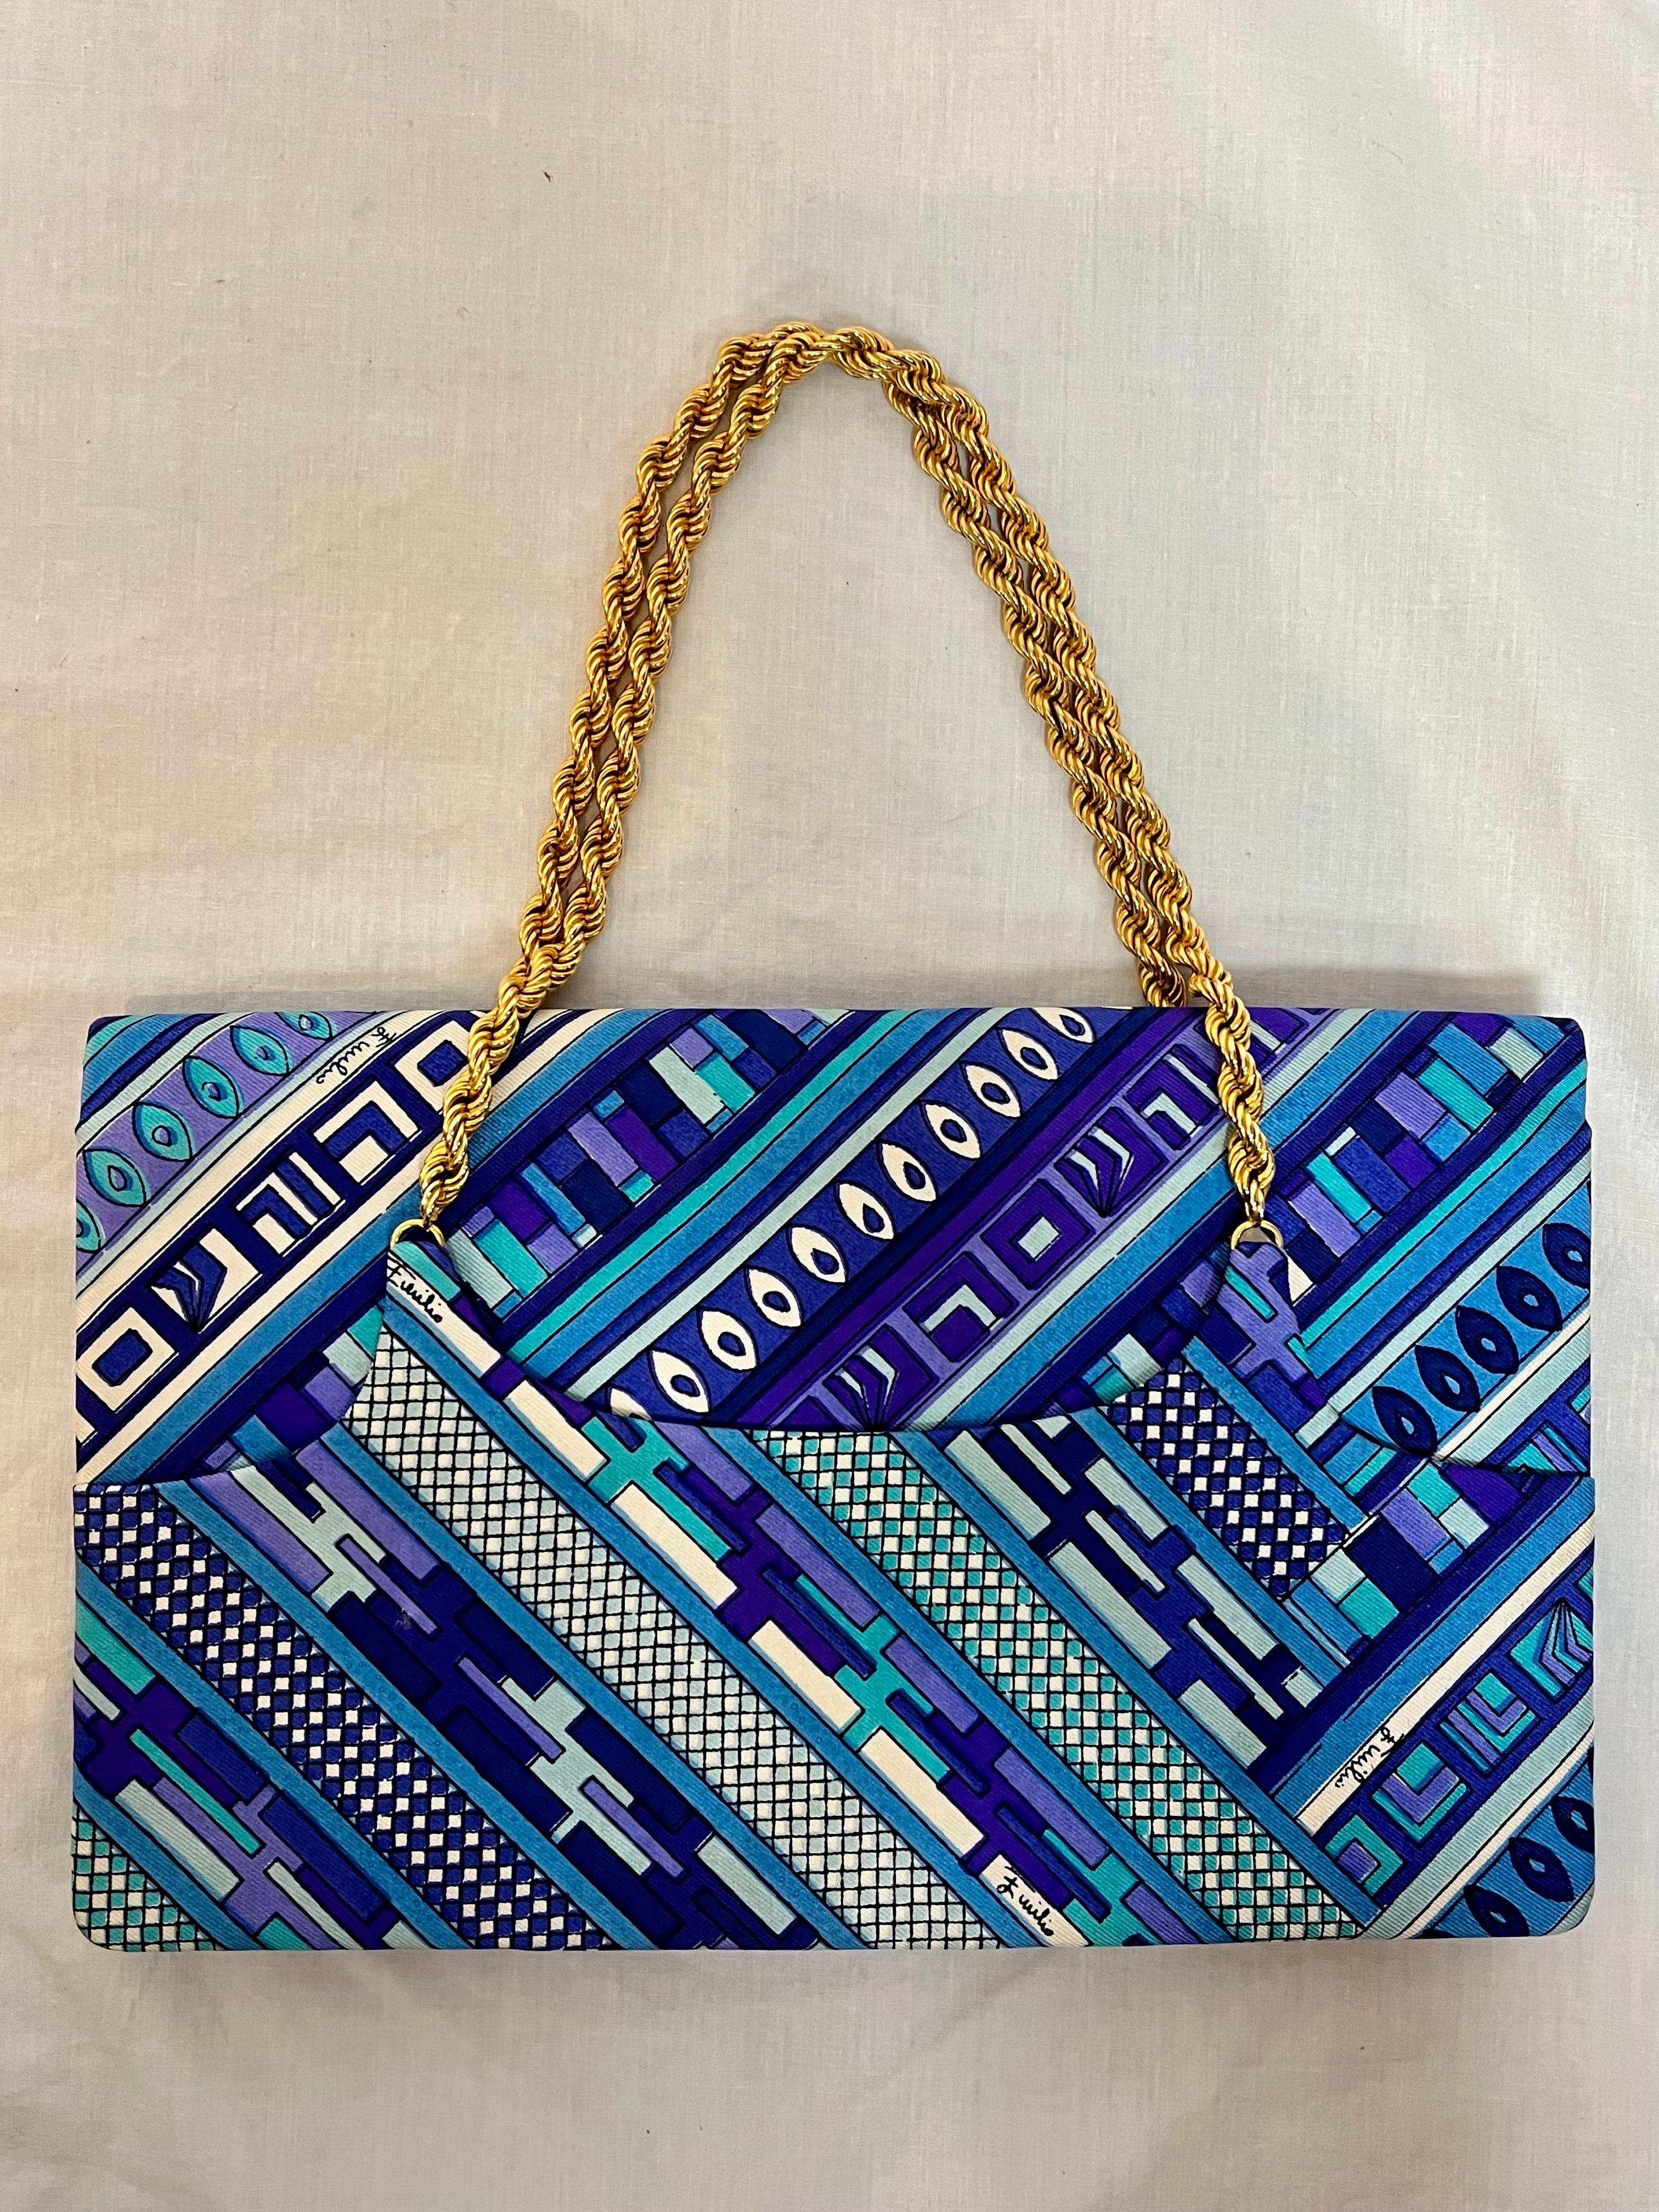 A gorgeous, fun and oh so chic bag by none other than Emlio Pucci. 